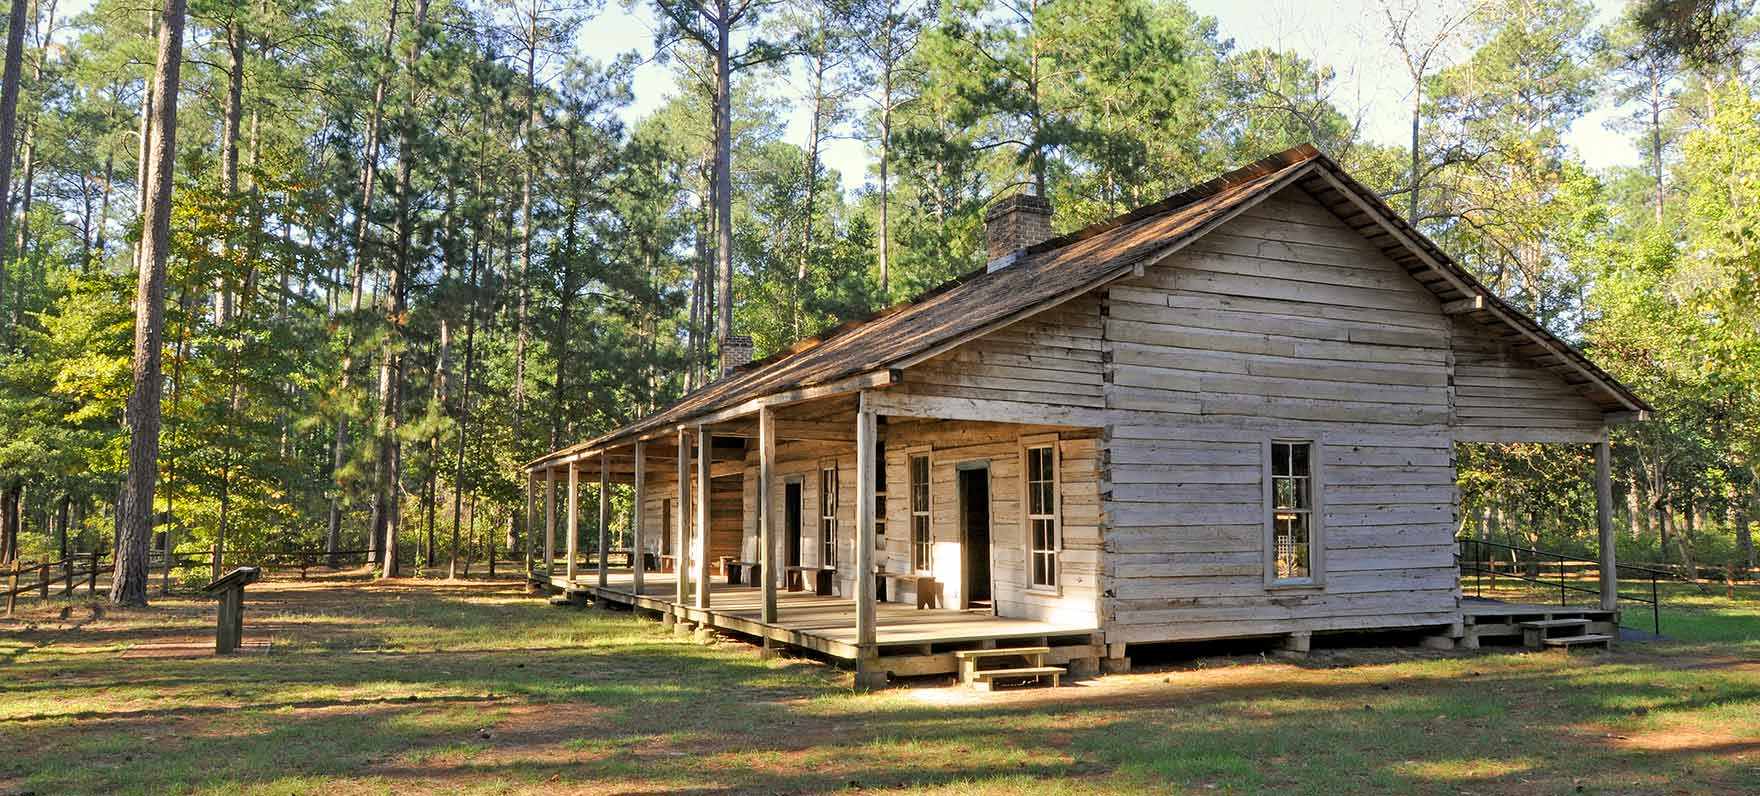 Rice Family Cabin at Mission Tejas State Park in Grapeland, Texas